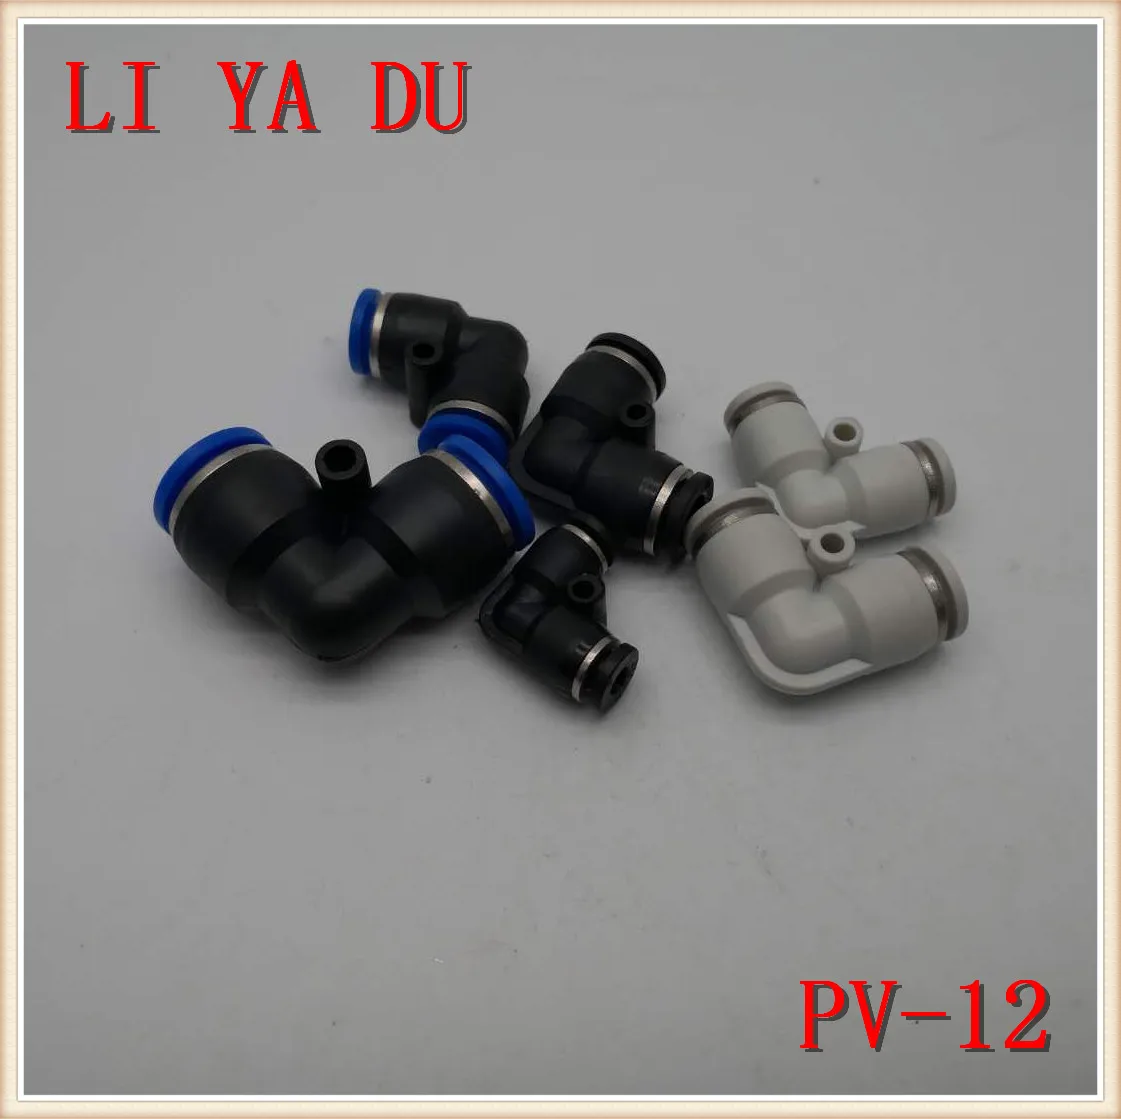 

50PCS/LOT PV-12 pneumatic pipe joint quick connector right angle 90 degree plastic elbow